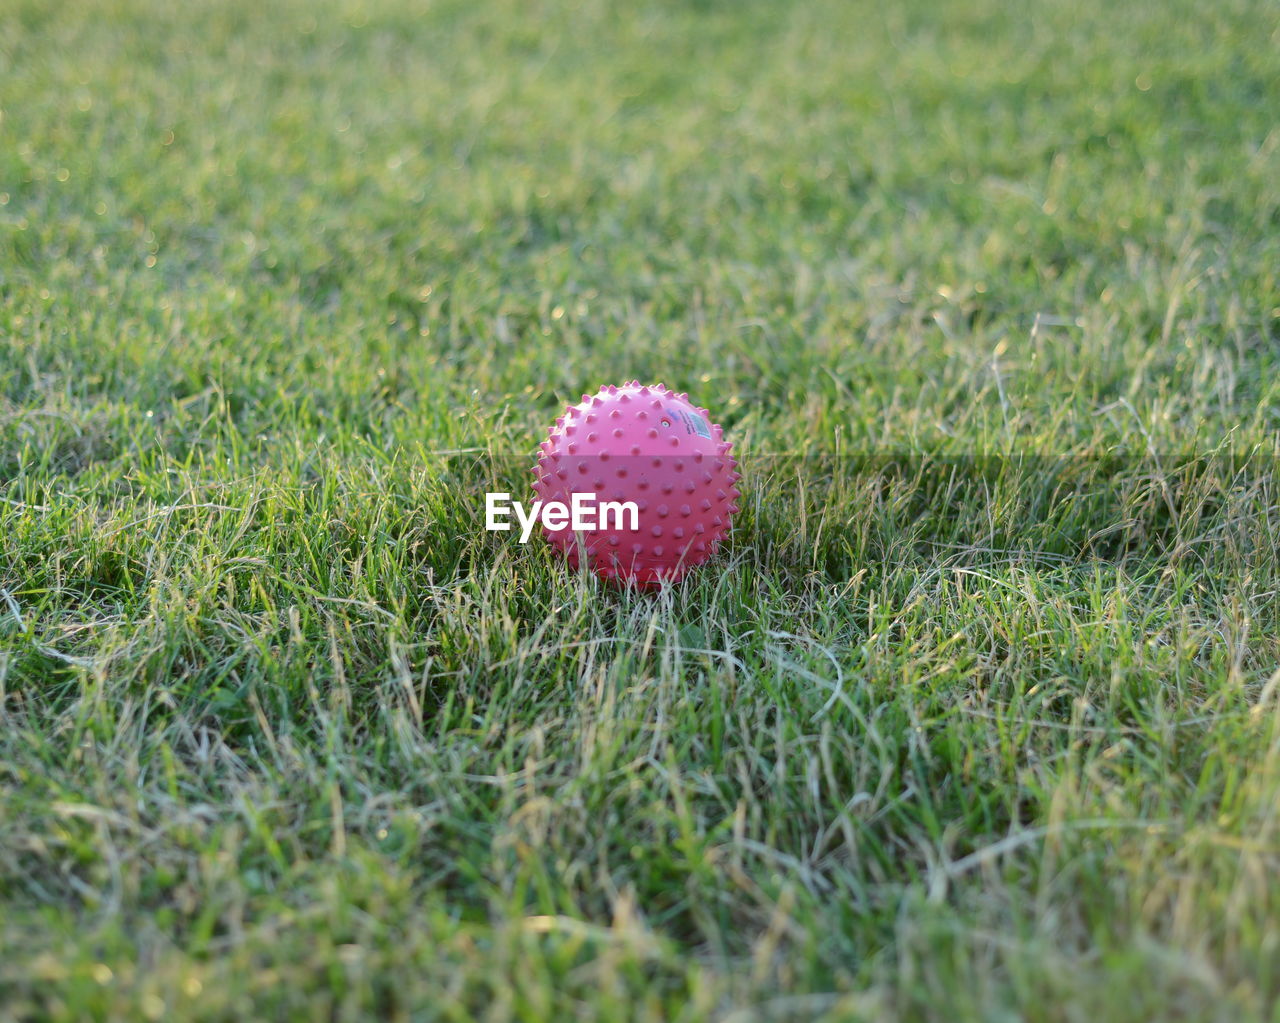 Red ball in grass